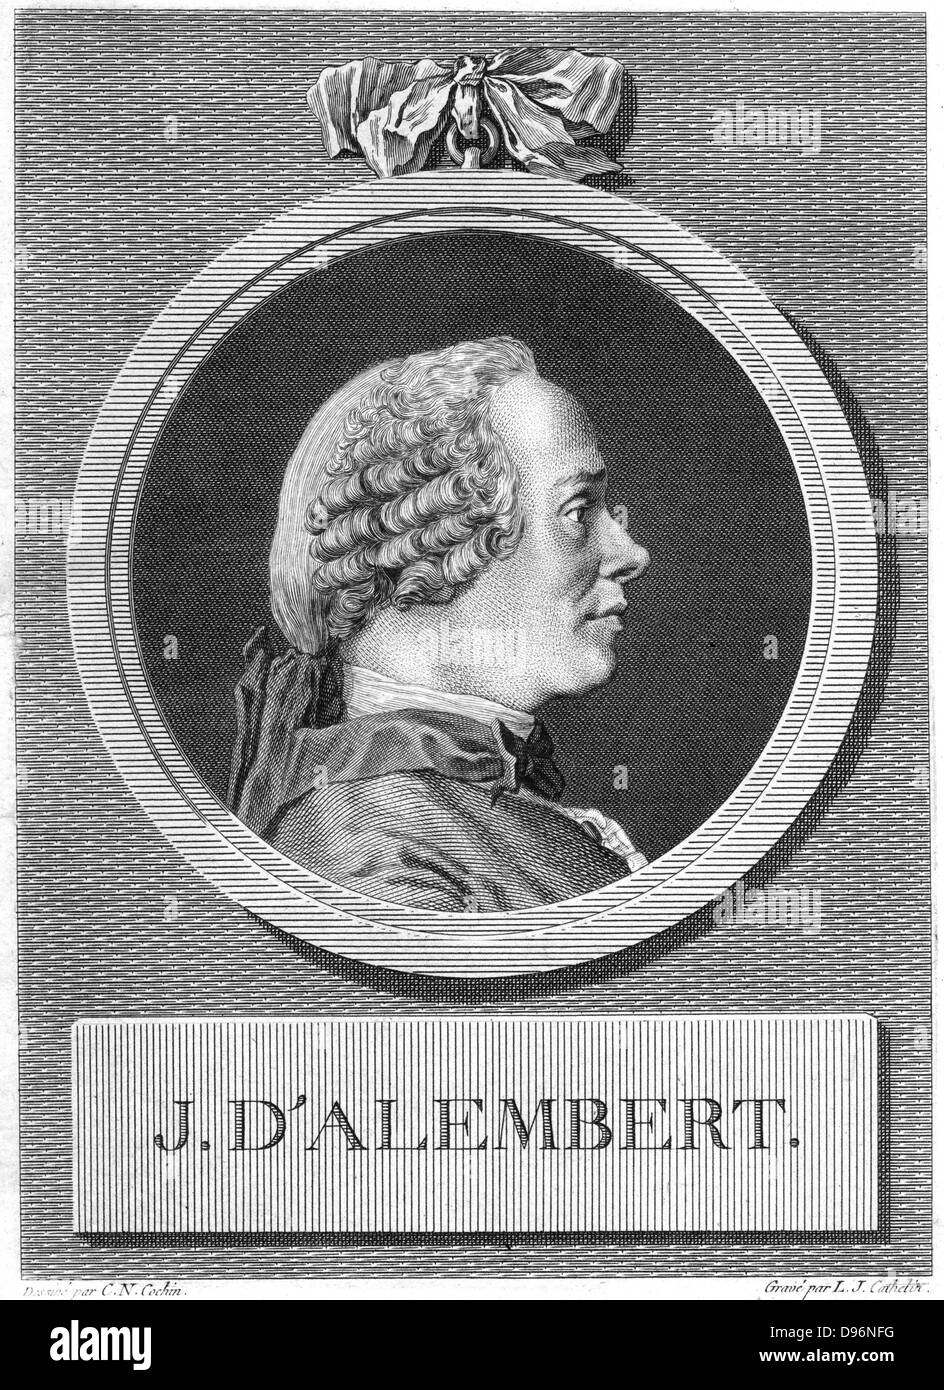 Jean le Rond D'Alembert (1717-1783) French philosopher, mathematician and encyclopedist. [18th century]. Collaborated with Denis Diderot (1713-1784) on the 'Encyclopedie' of which he was scientific editor until 1758 and for which he wrote the 'Discours Preliminaire' declaring the philosophy of the French Enlightenment. Engraving by LJ Cathelin (1738-1804) after CN Cochin (1715-1790). Stock Photo